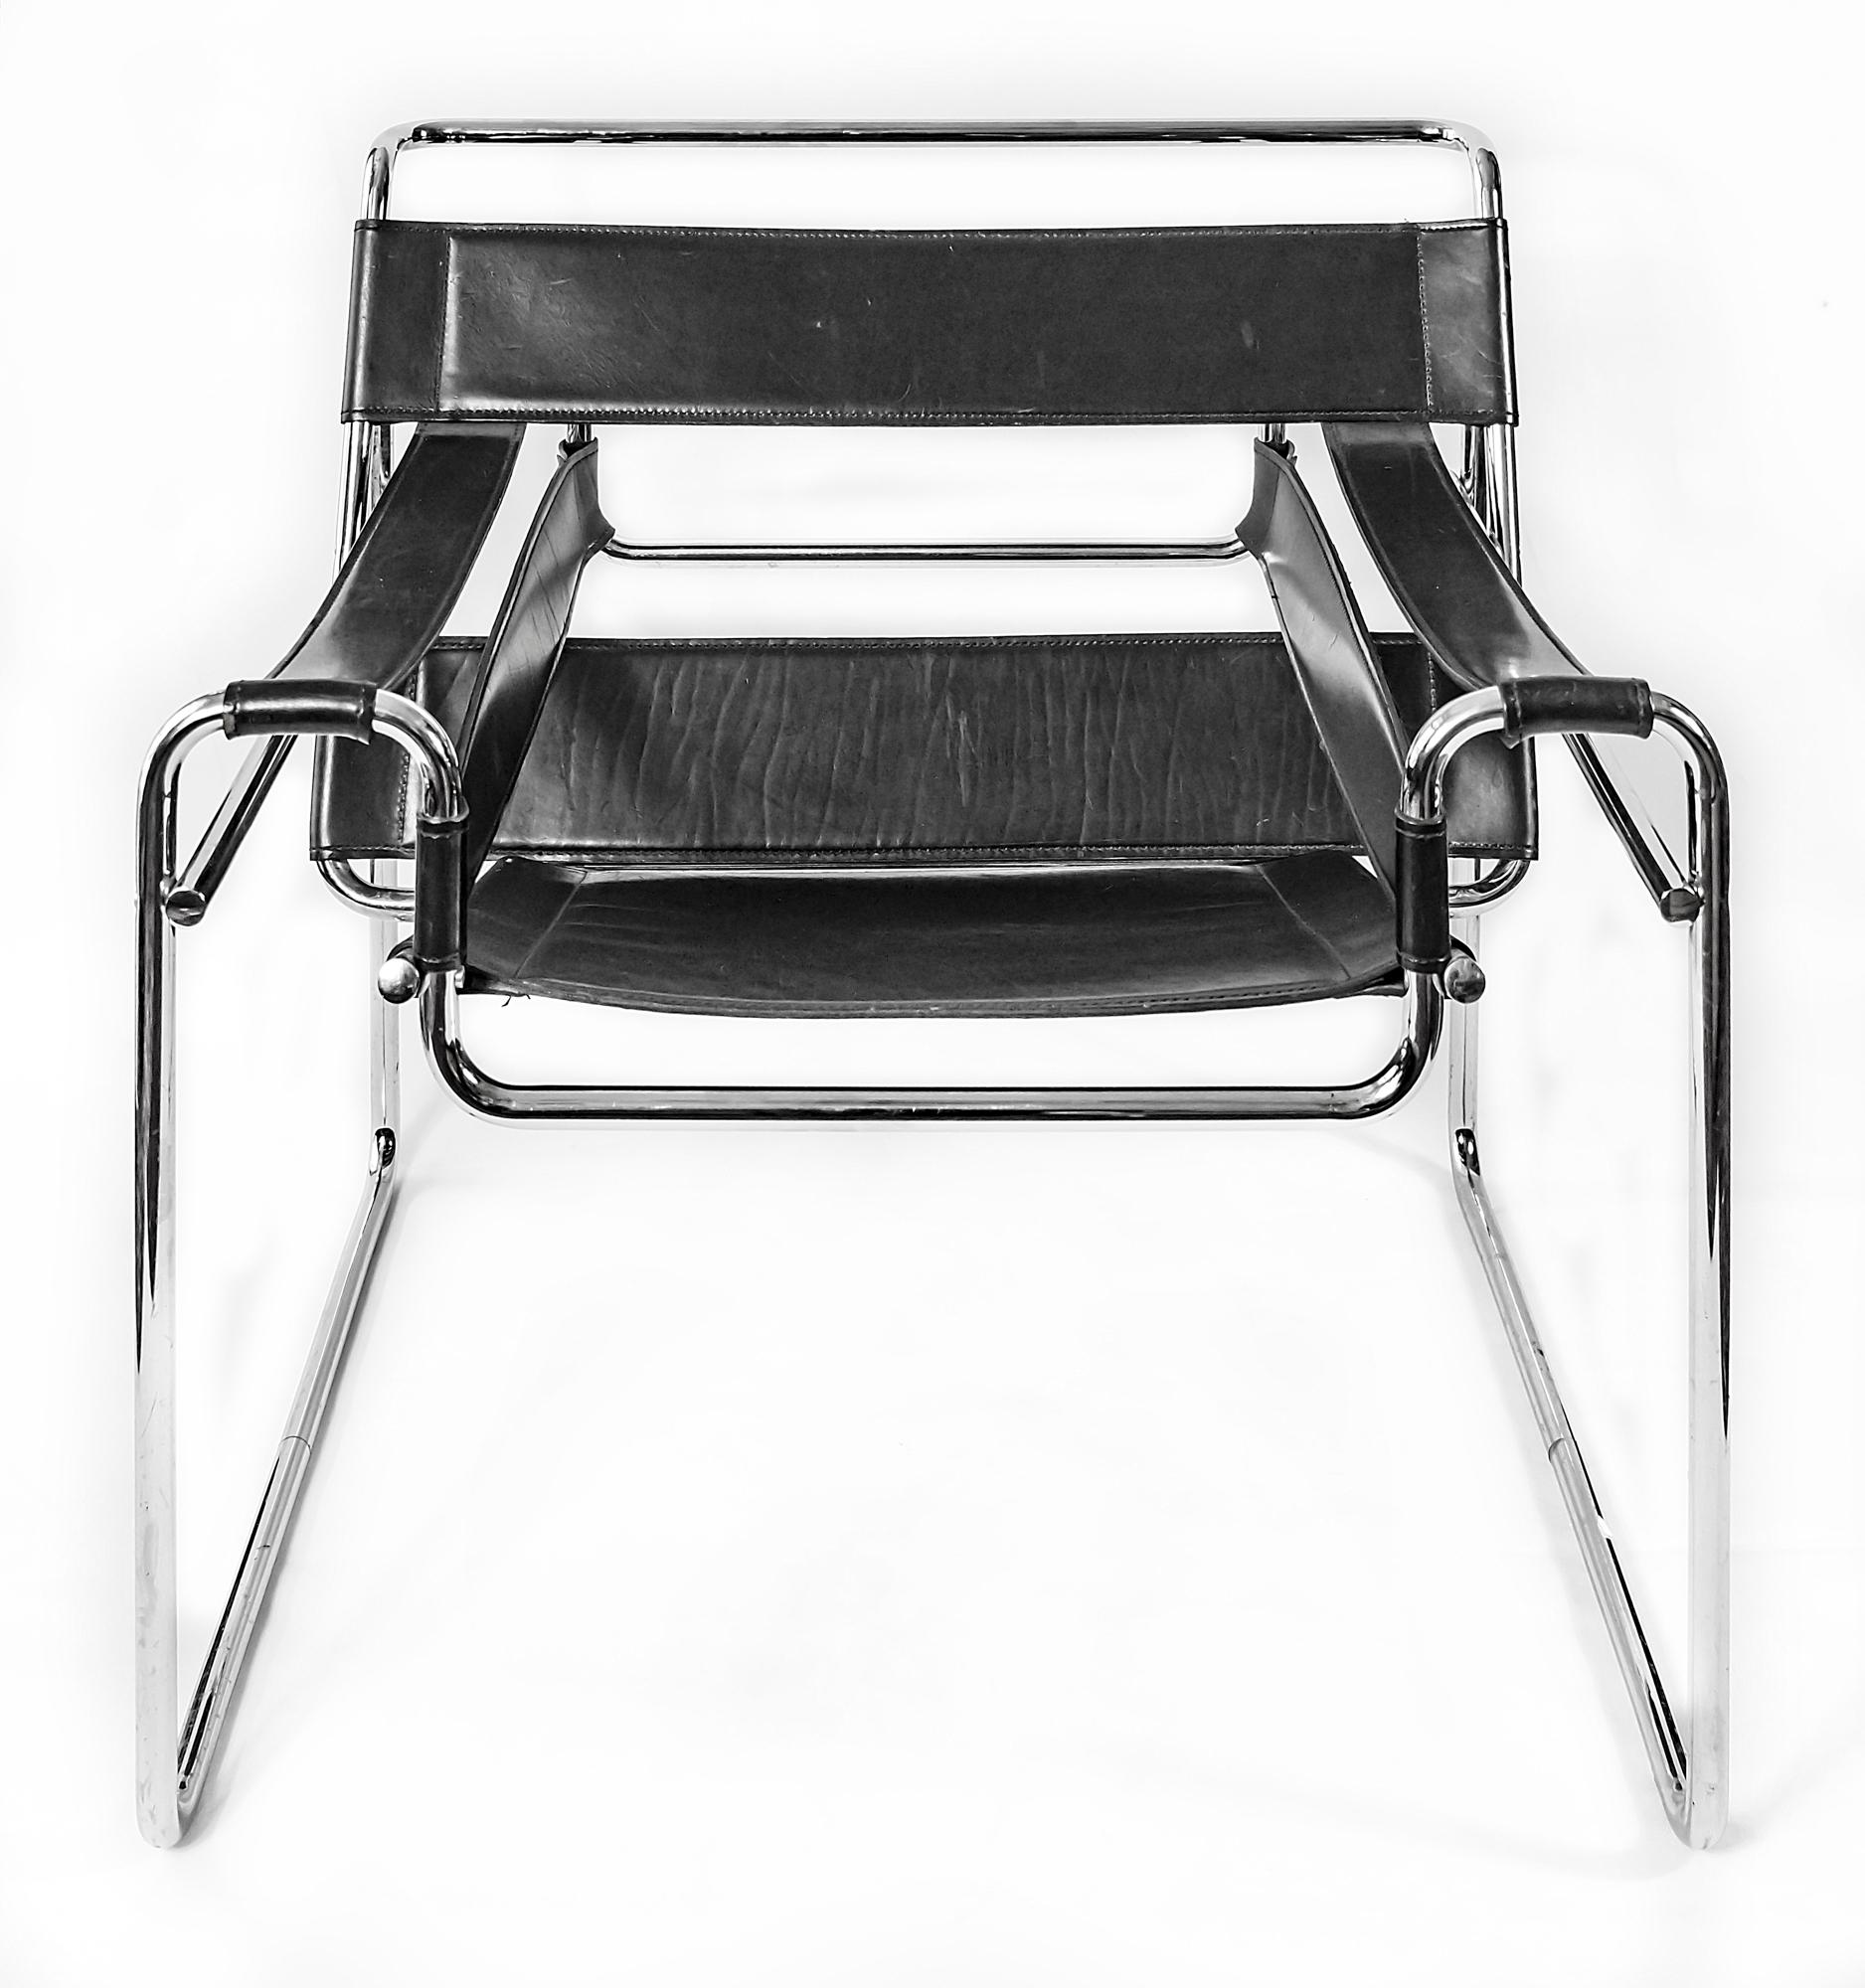 Armchair in the style of Wassily chair, designed by Marcel Breuer, circa 1925.
Manufactured circa 1980s, black leather, chromed steel tube frame.

   